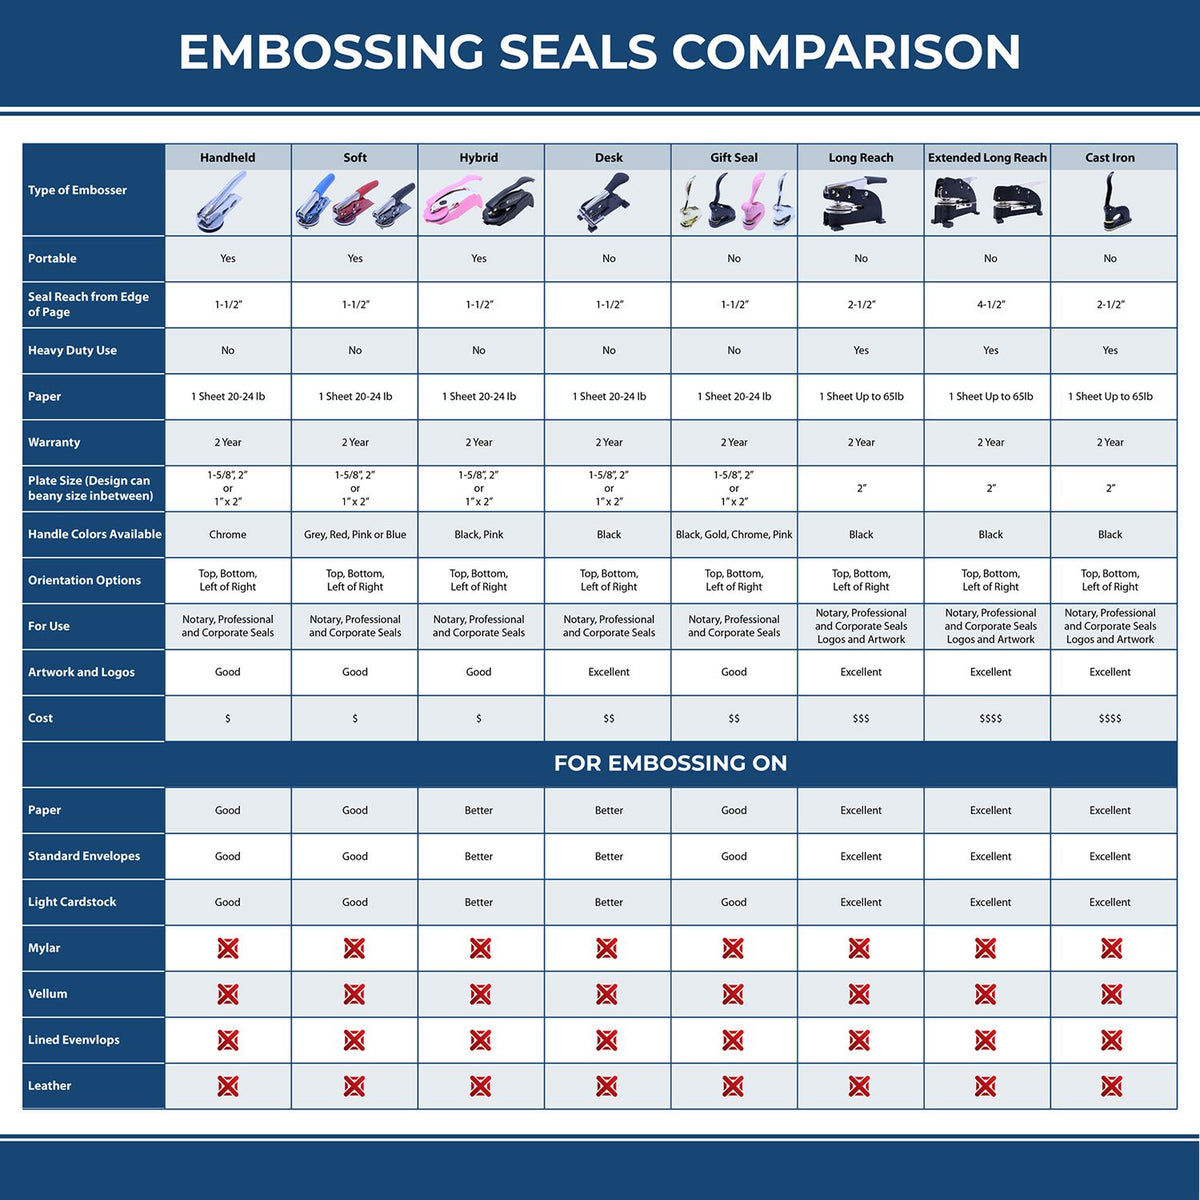 A comparison chart for the different types of mount models available for the Rhode Island Desk Architect Embossing Seal.